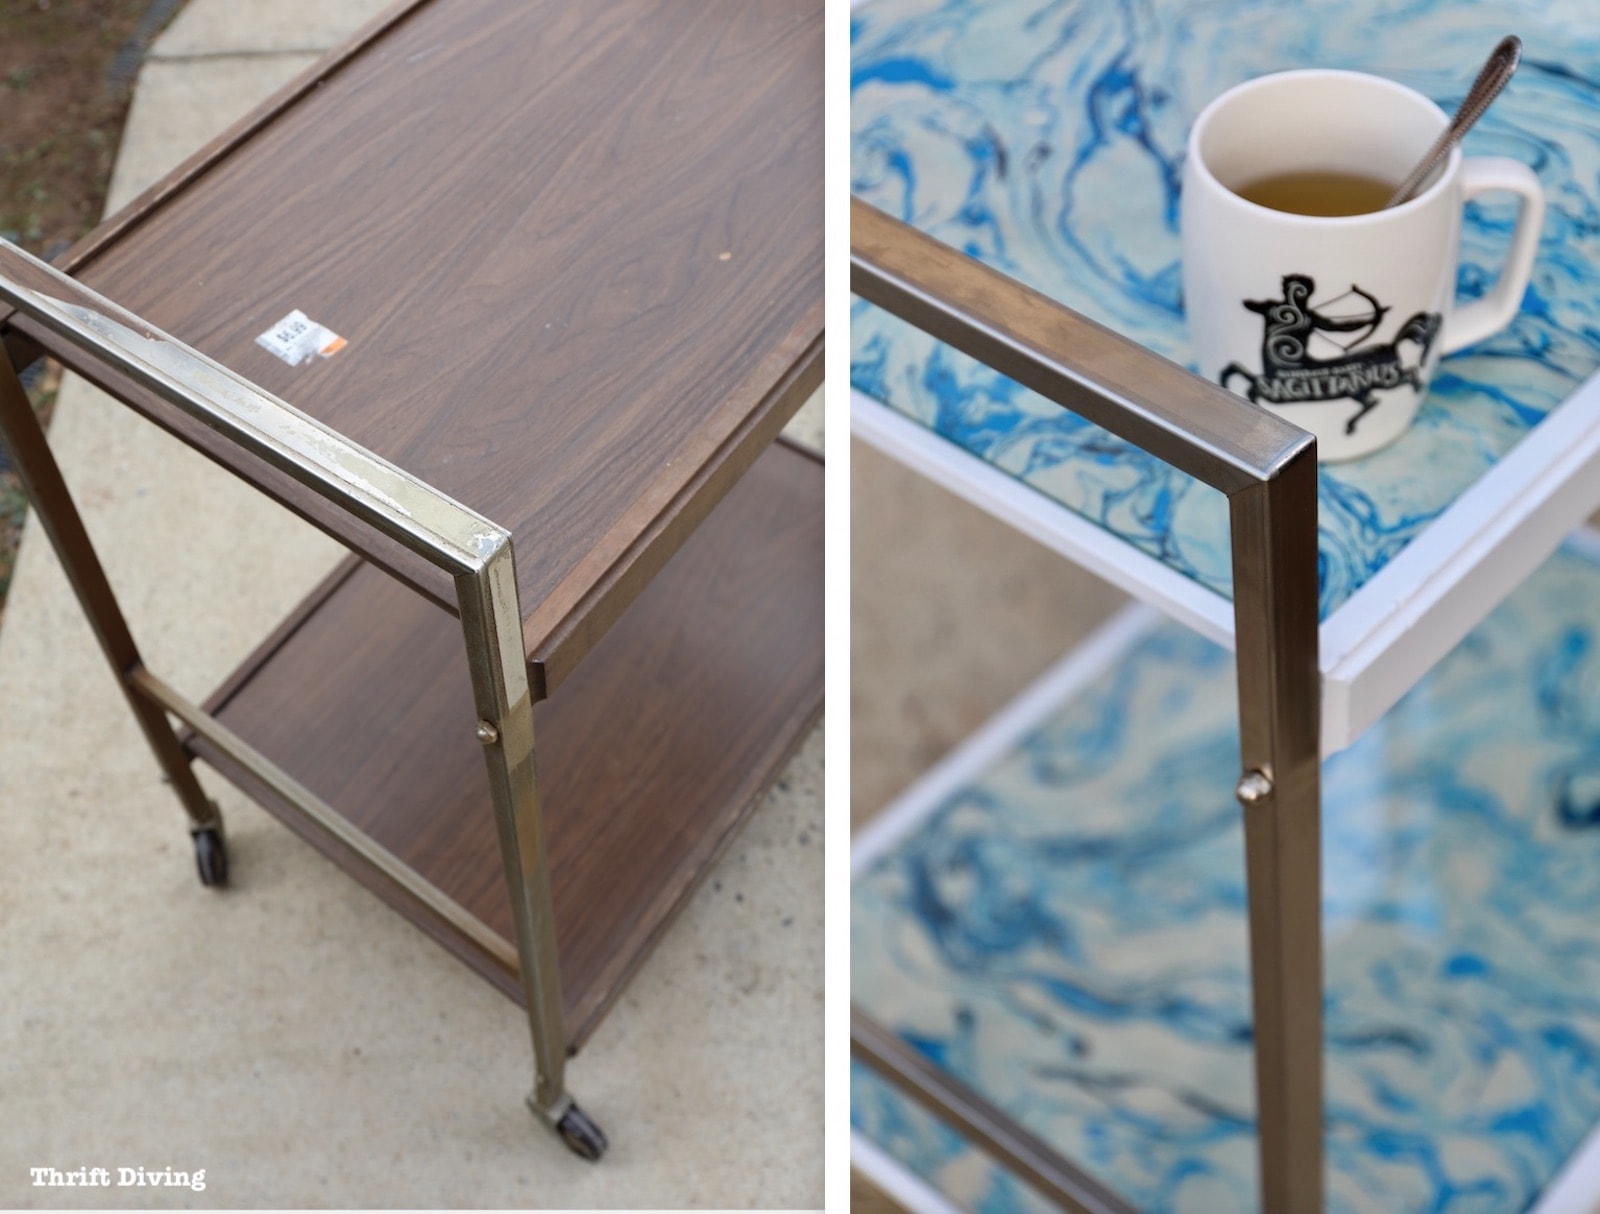 How to - Bar Cart Makeover - Before and After of a 1970's bar cart with marbled paper. - Can be used as bar cart or tea cart. - Thrift Diving